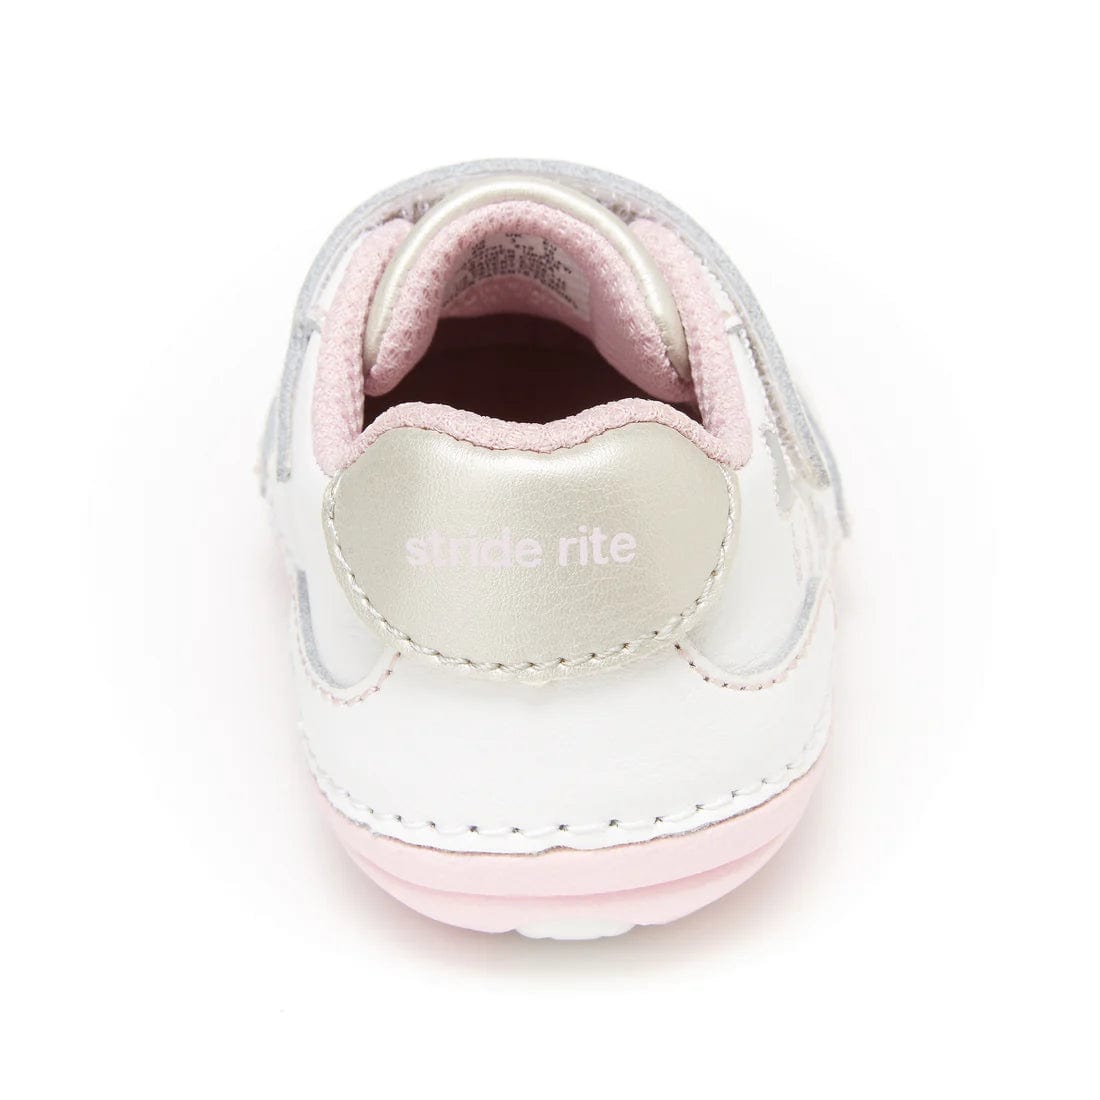 Stride Rite First Step Shoes Stride Rite Adalyn - White/Silver